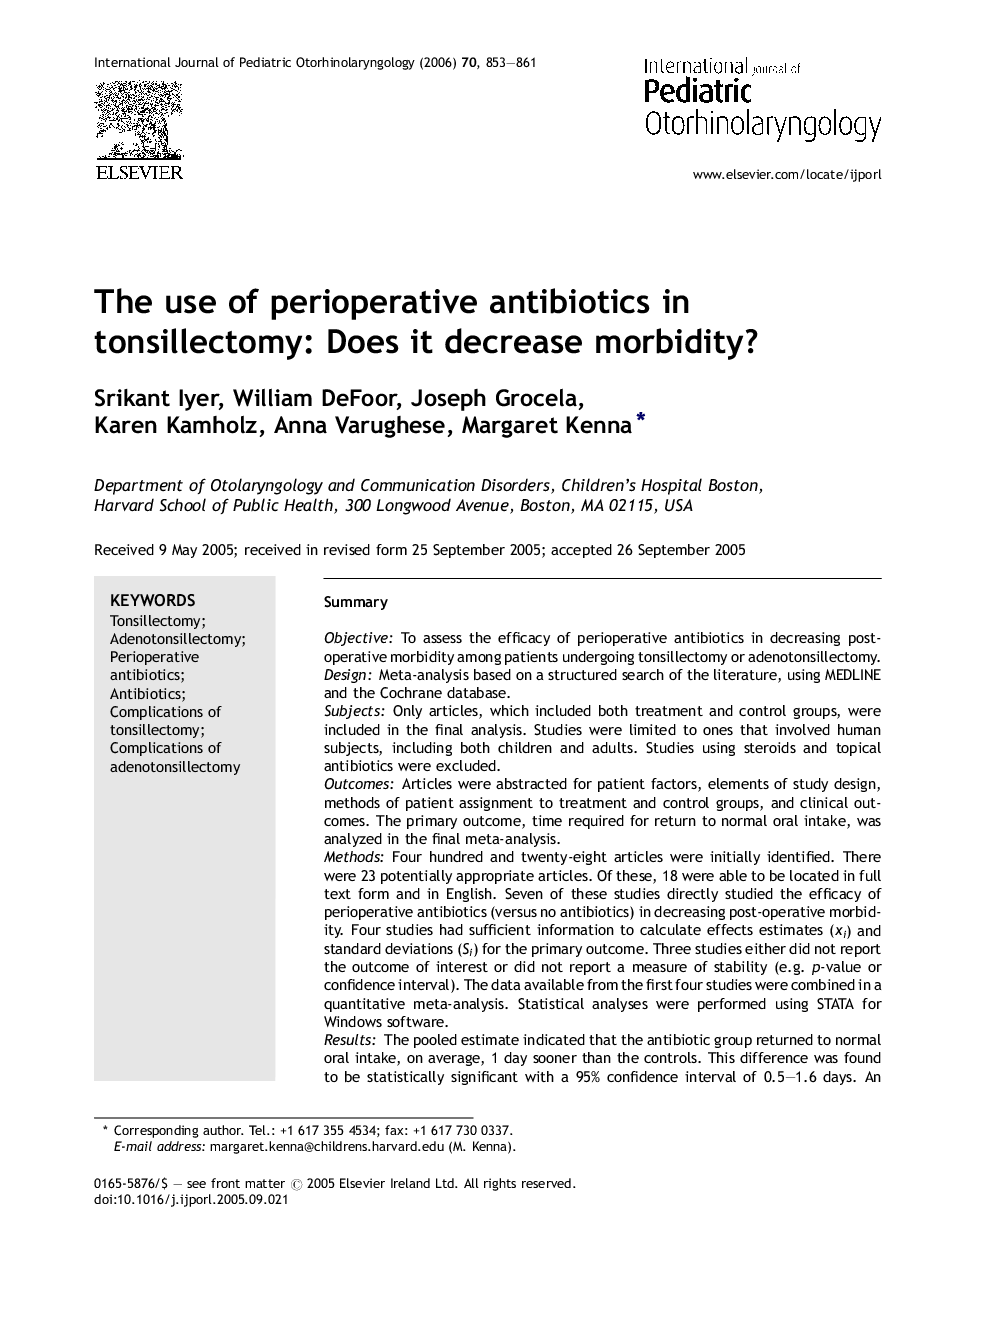 The use of perioperative antibiotics in tonsillectomy: Does it decrease morbidity?